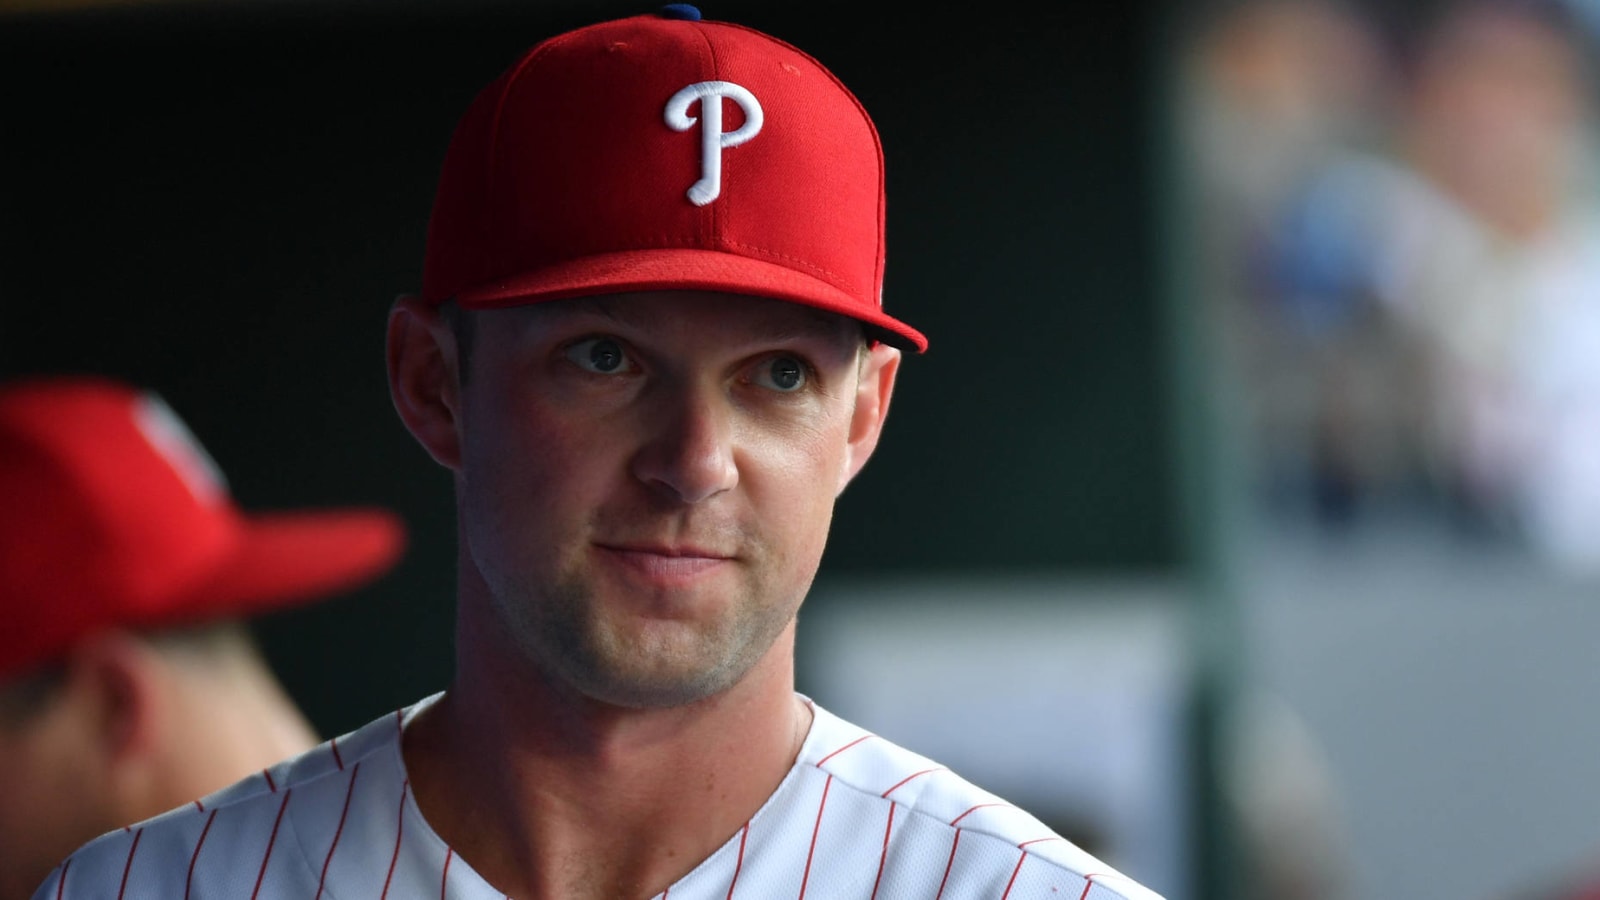 X-rays negative on Phillies' Rhys Hoskins' right hand after hit-by-pitch  scare